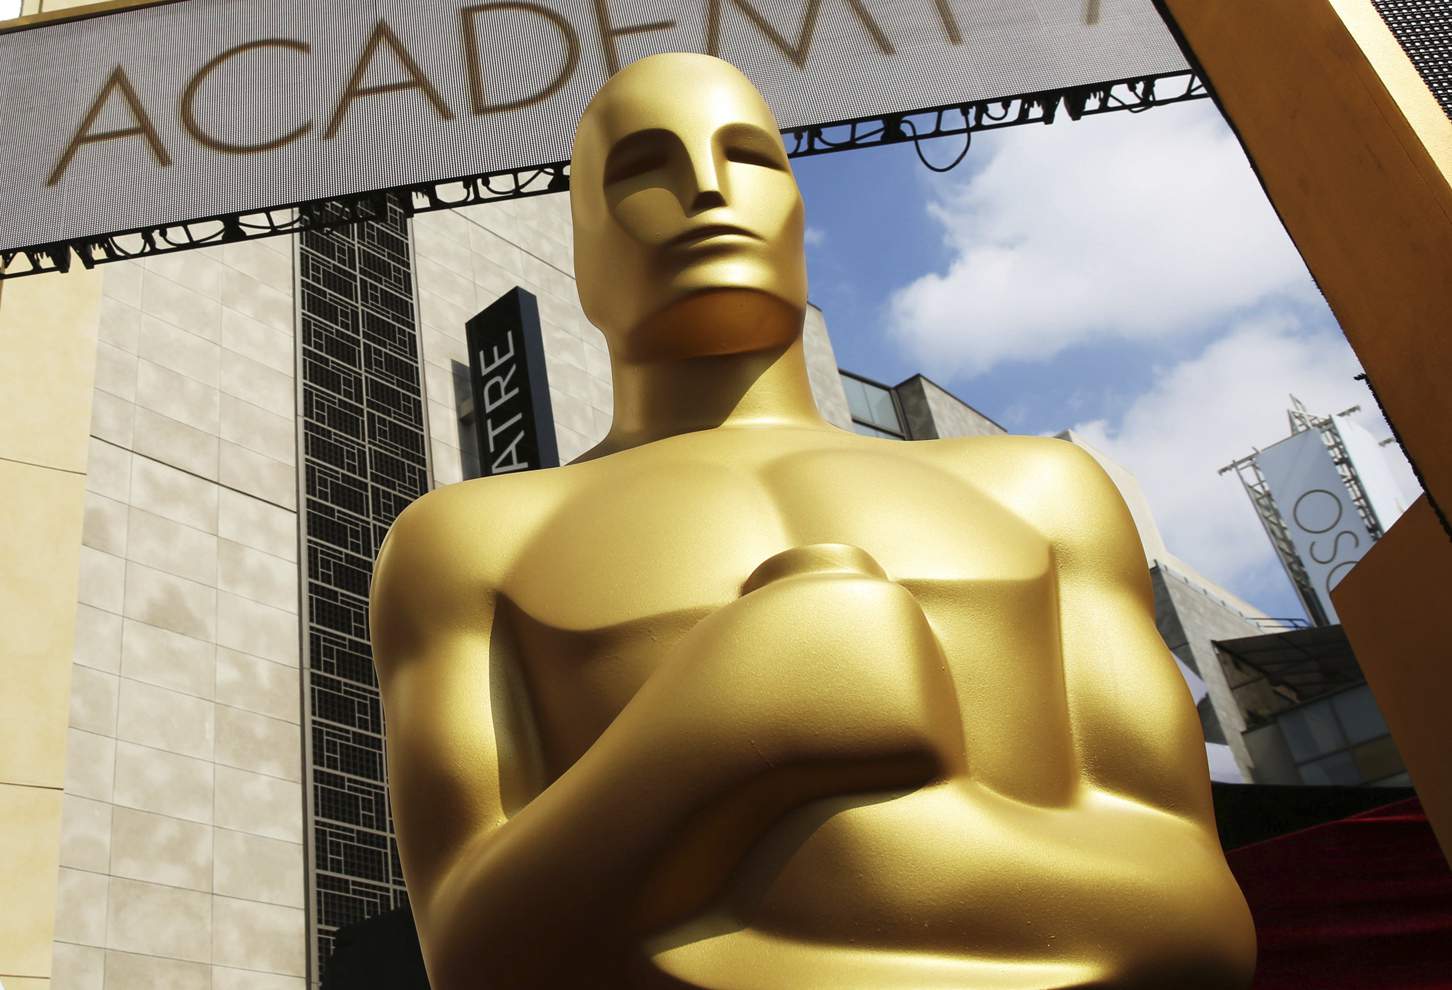 'Mank' leads Oscar nominations in a year of record diversity